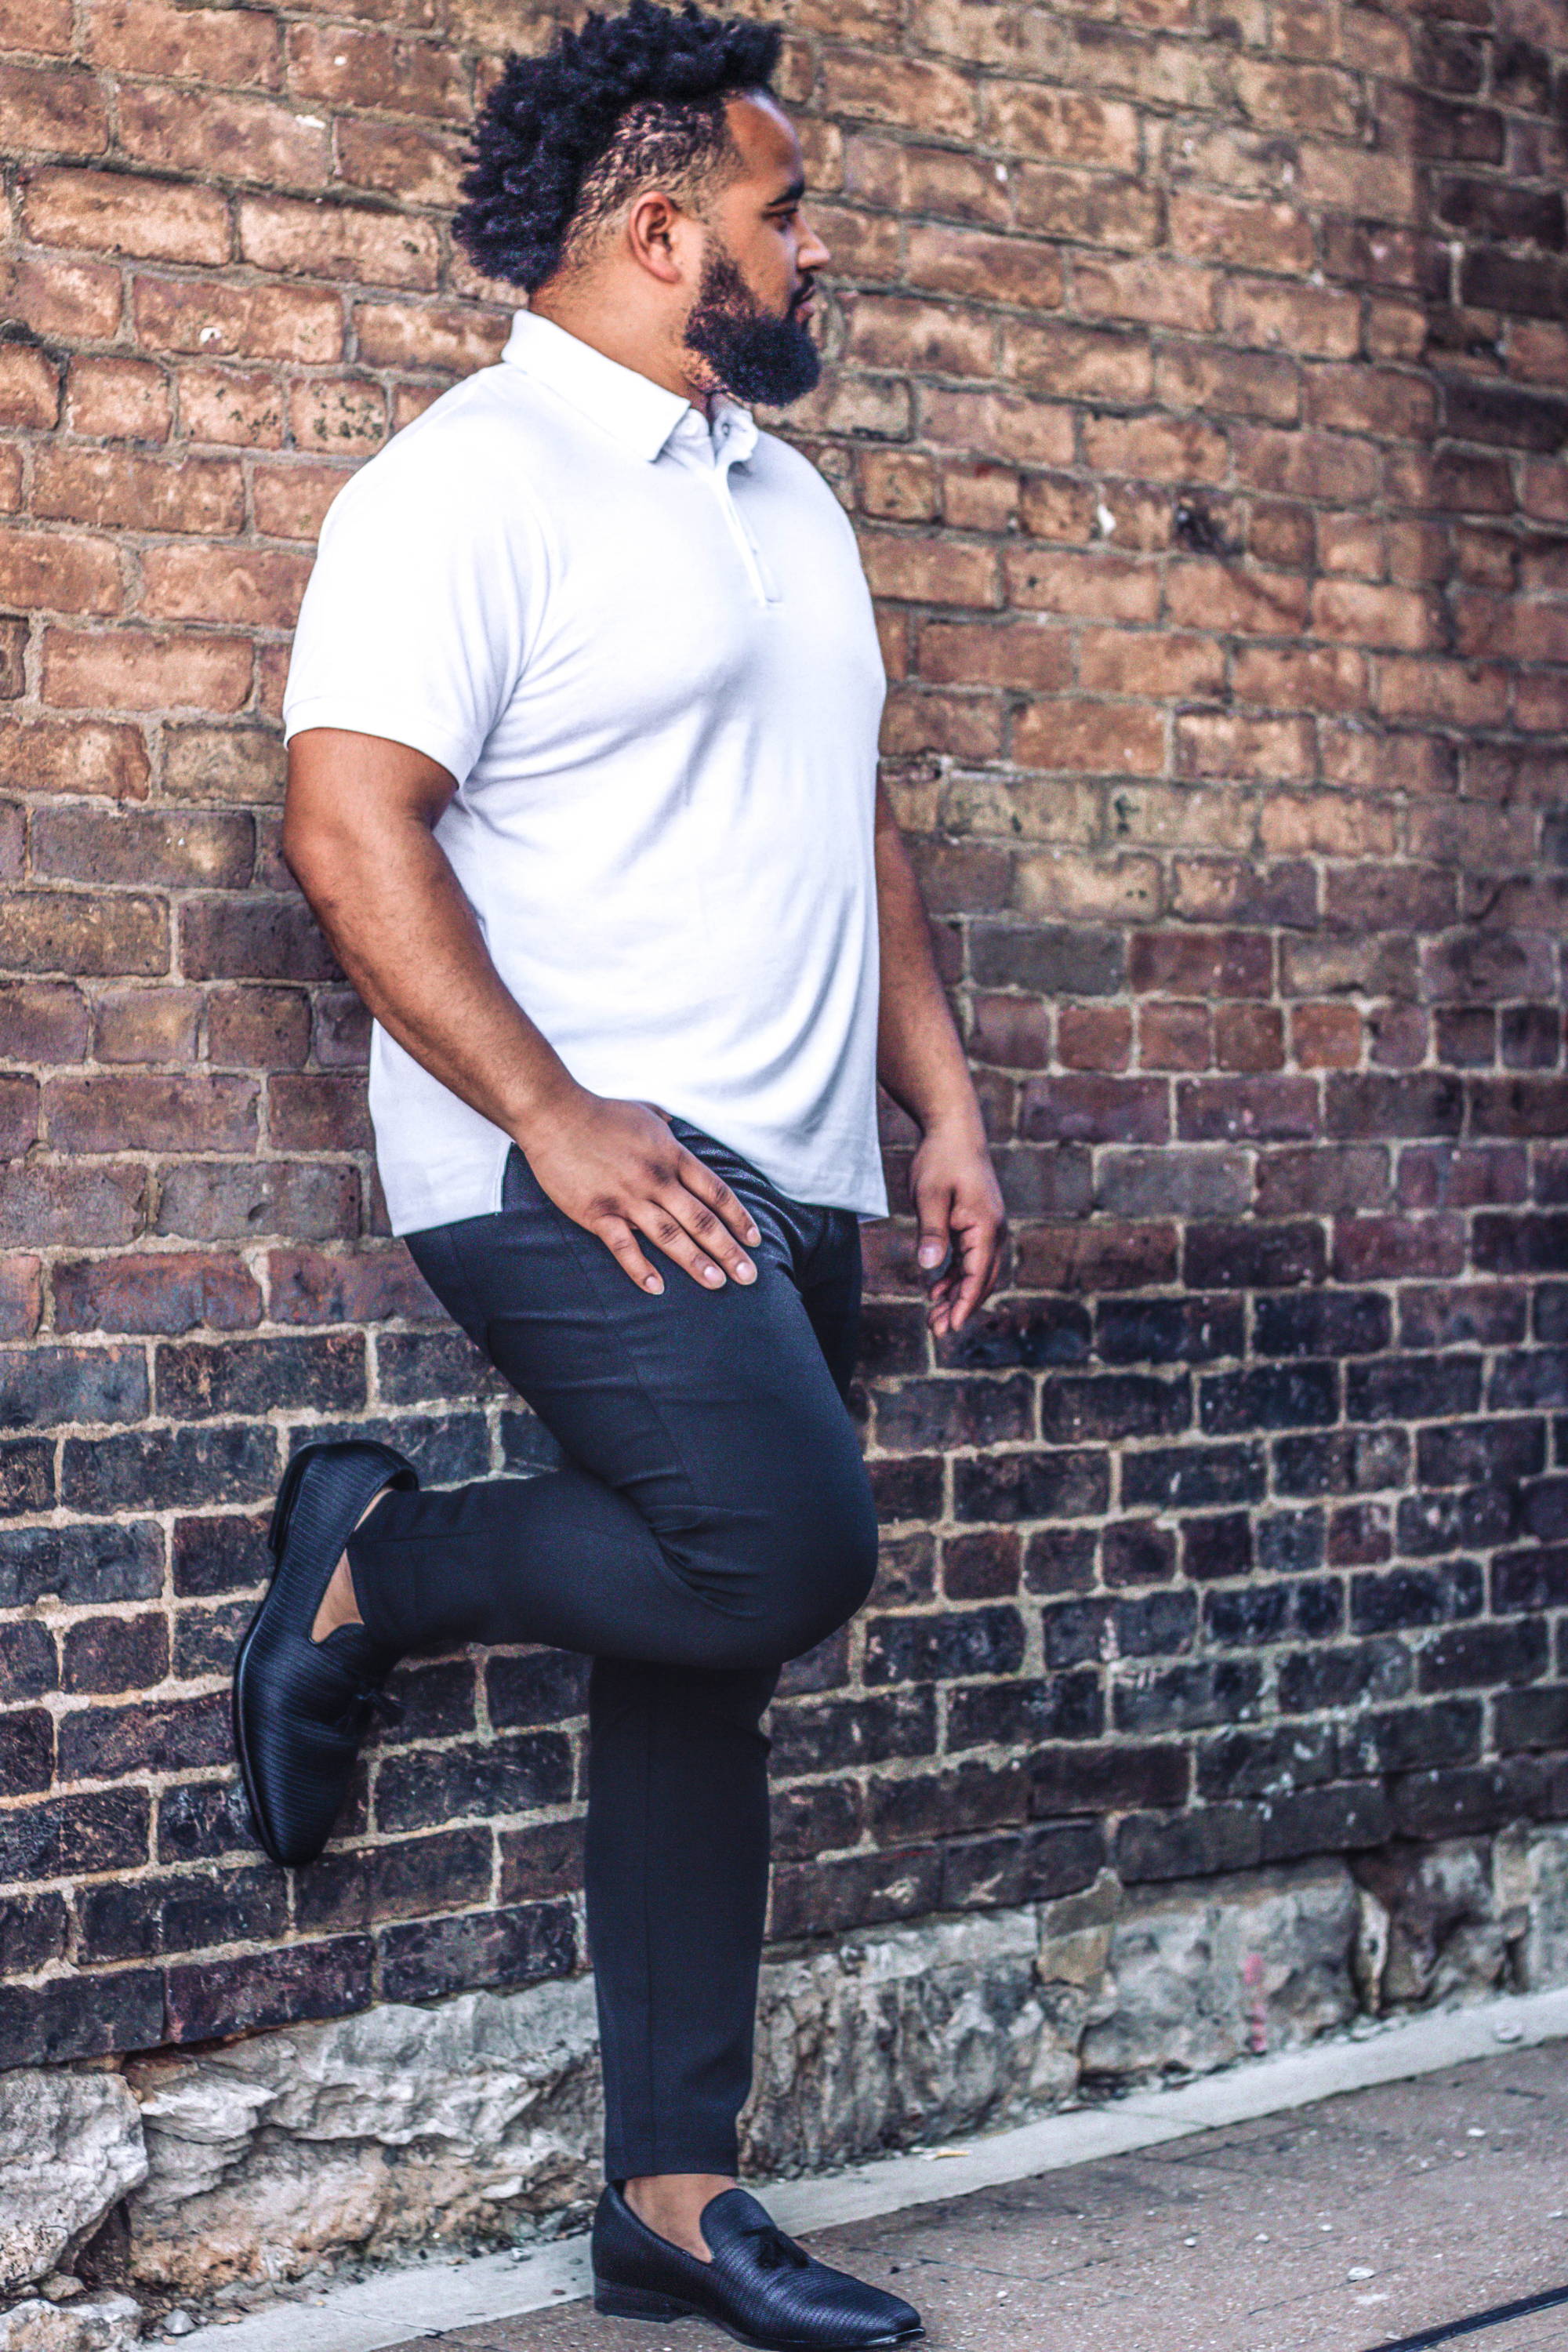 African American Male Wearing White Polo Shirt and Black Performance Pants from Under510.com